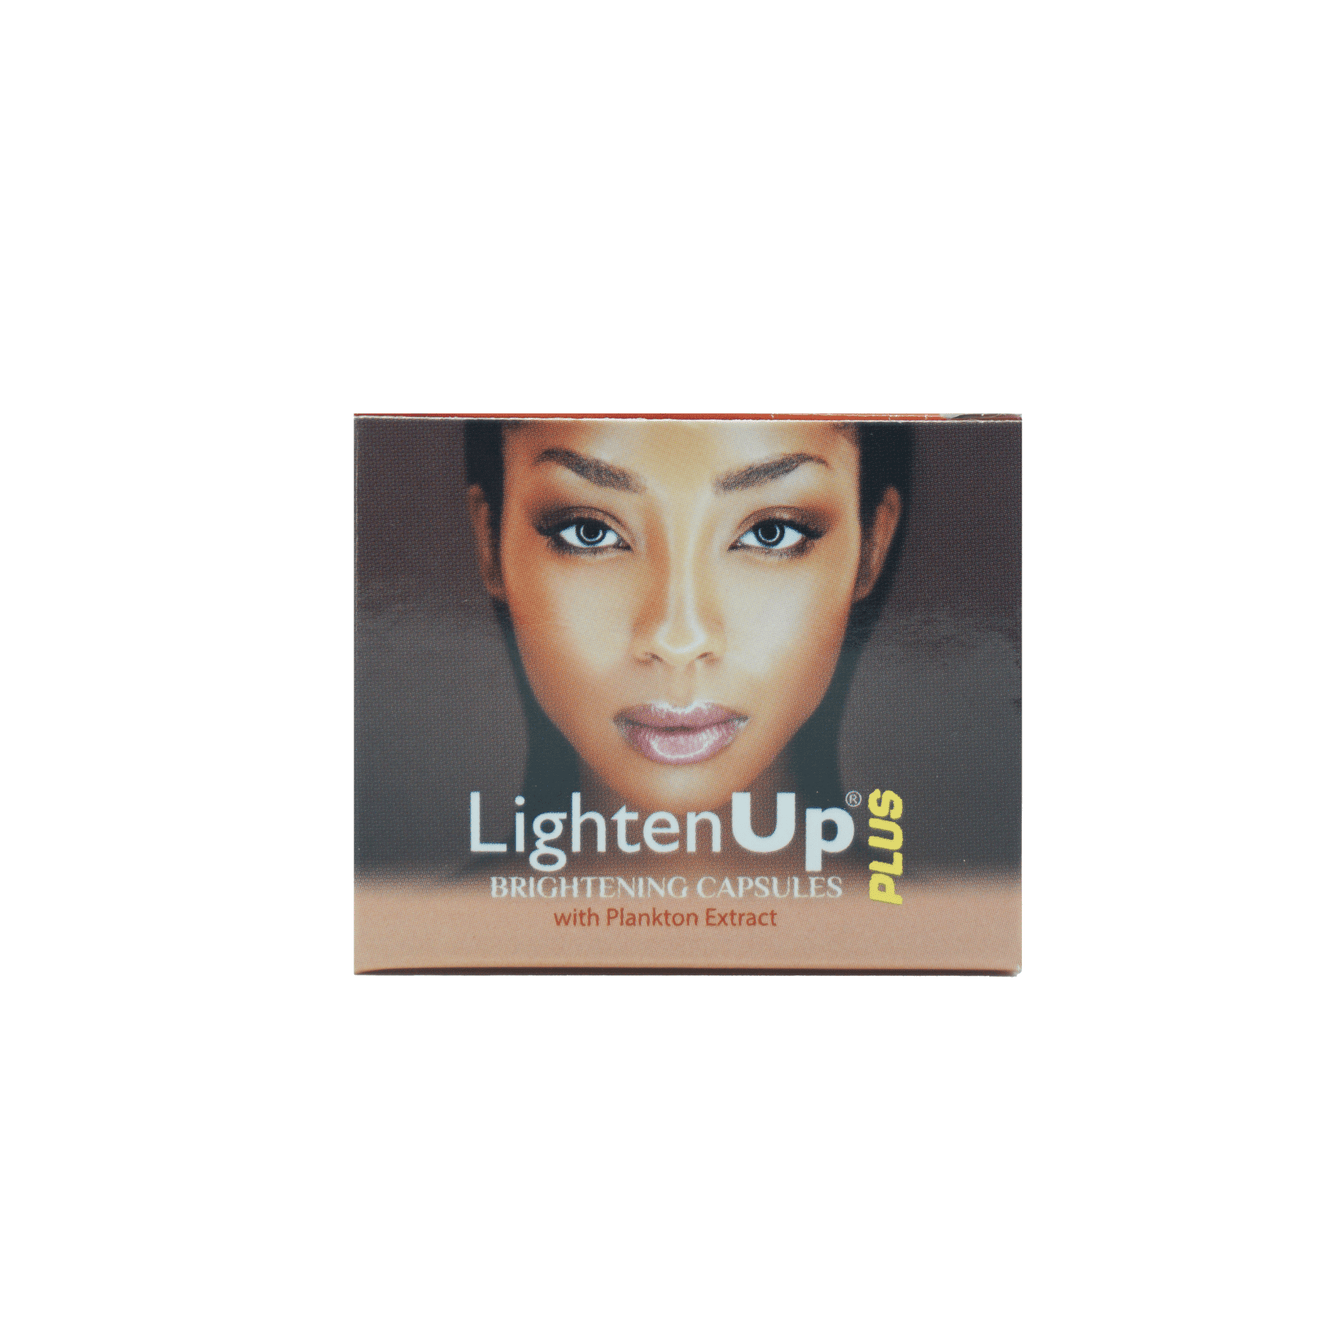 LightenUp Brightening Capsules with Plankton Extract Mitchell Brands - Mitchell Brands - Skin Lightening, Skin Brightening, Fade Dark Spots, Shea Butter, Hair Growth Products